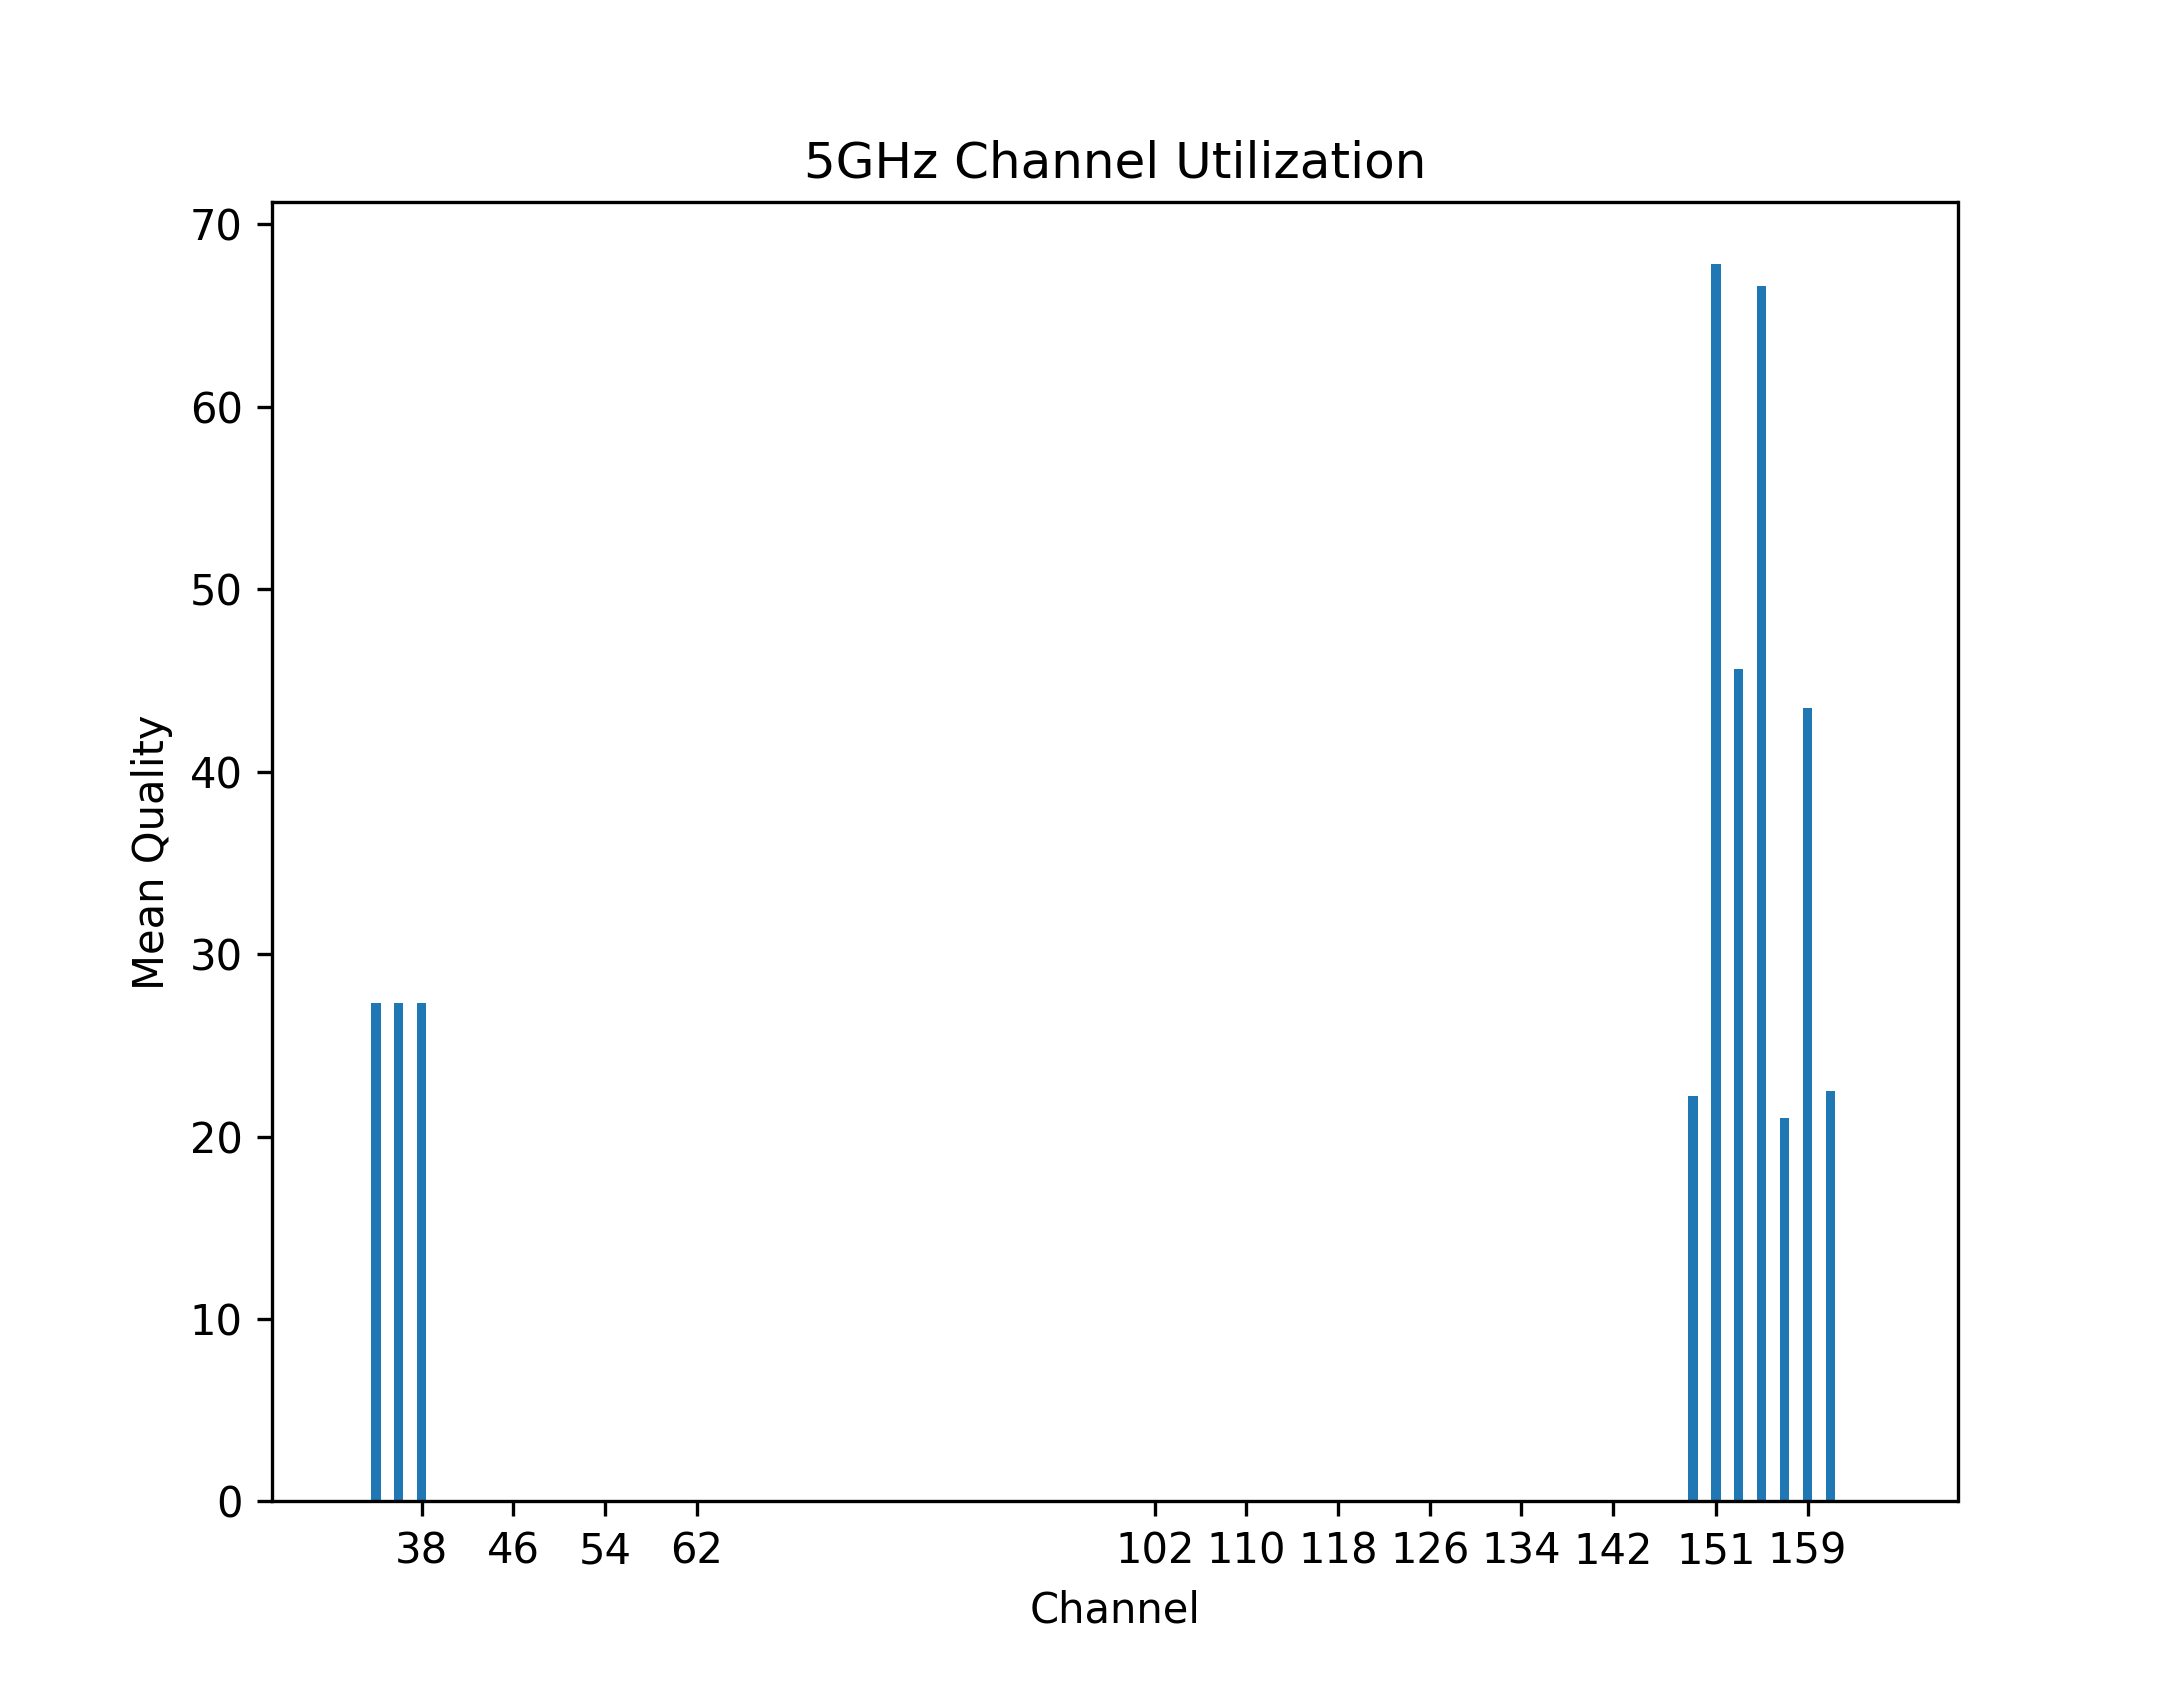 example 5 GHz channel usage